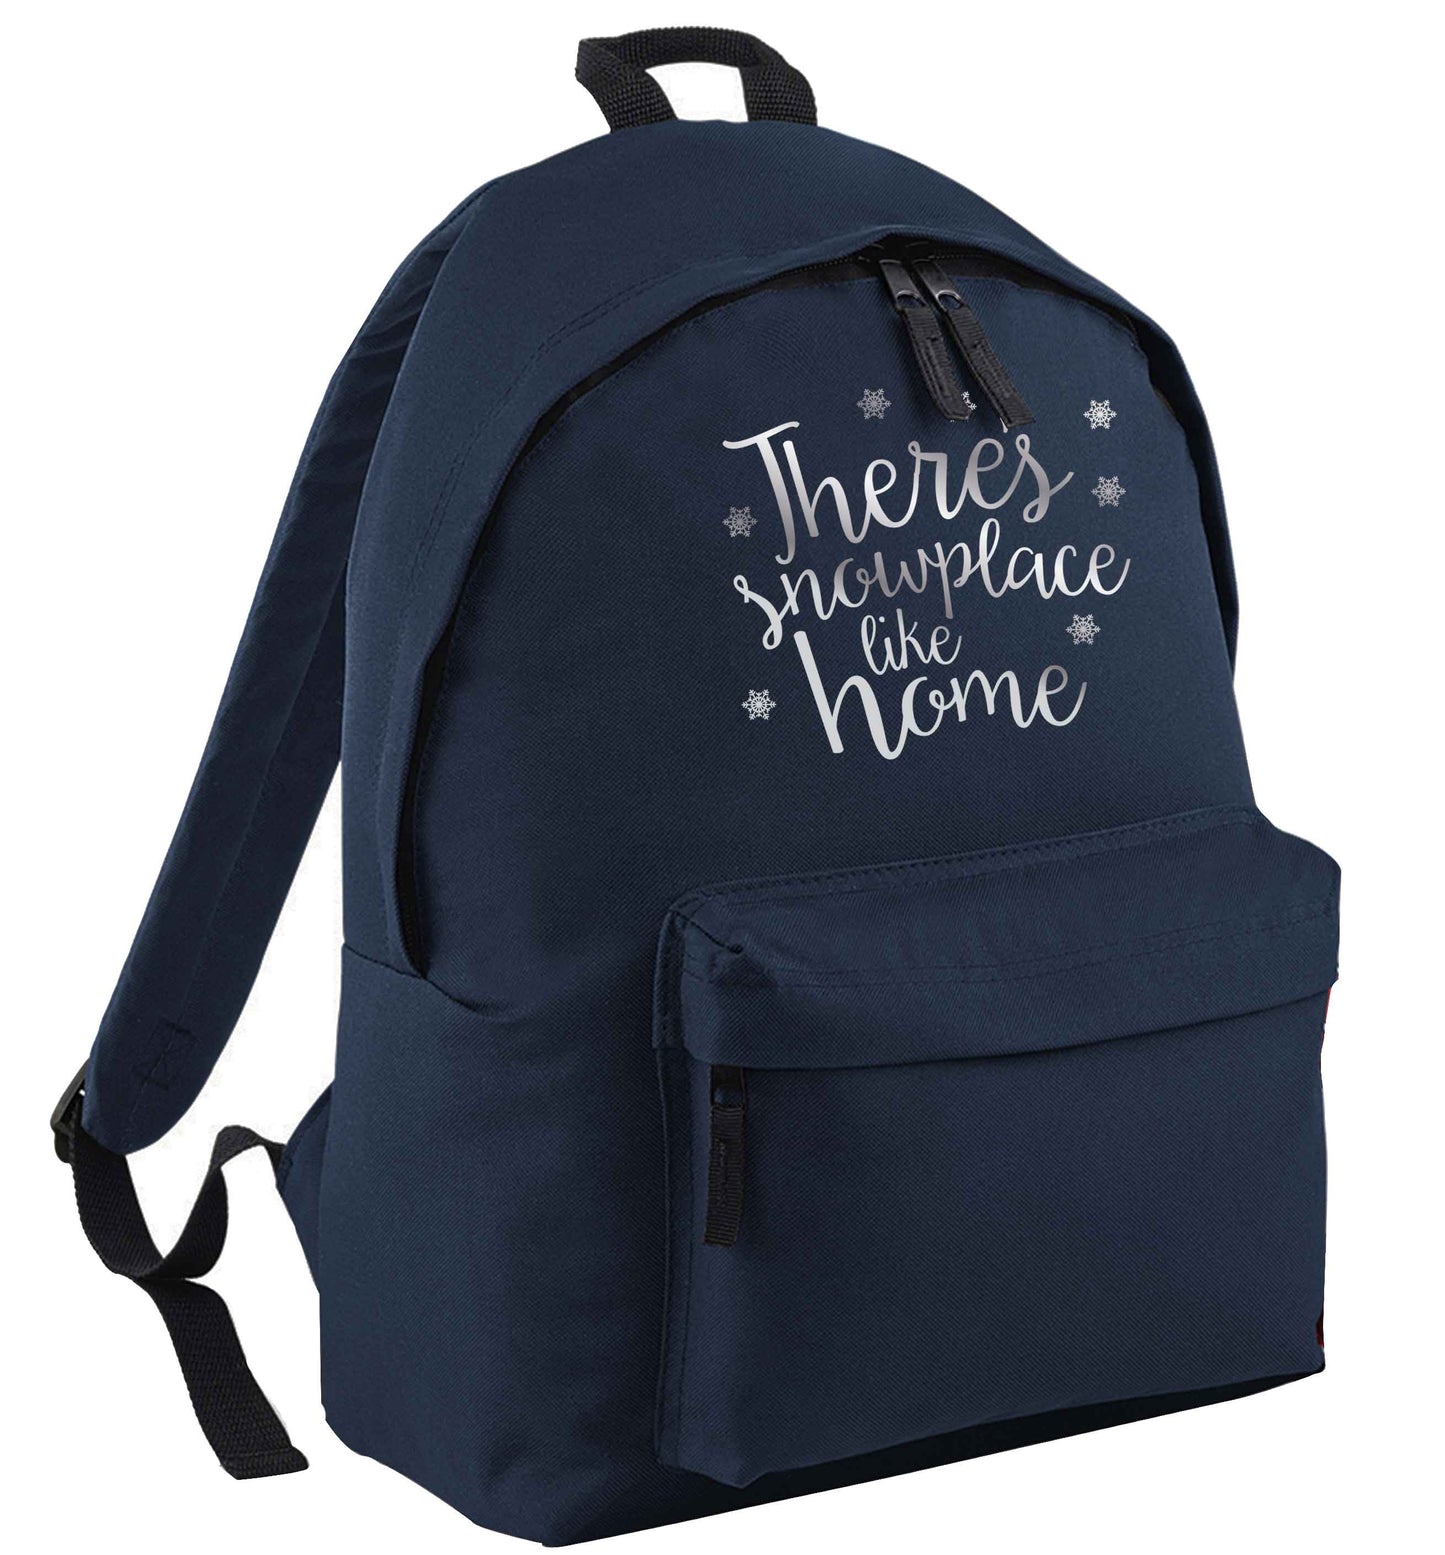 There's snowplace like home - metallic silver navy adults backpack